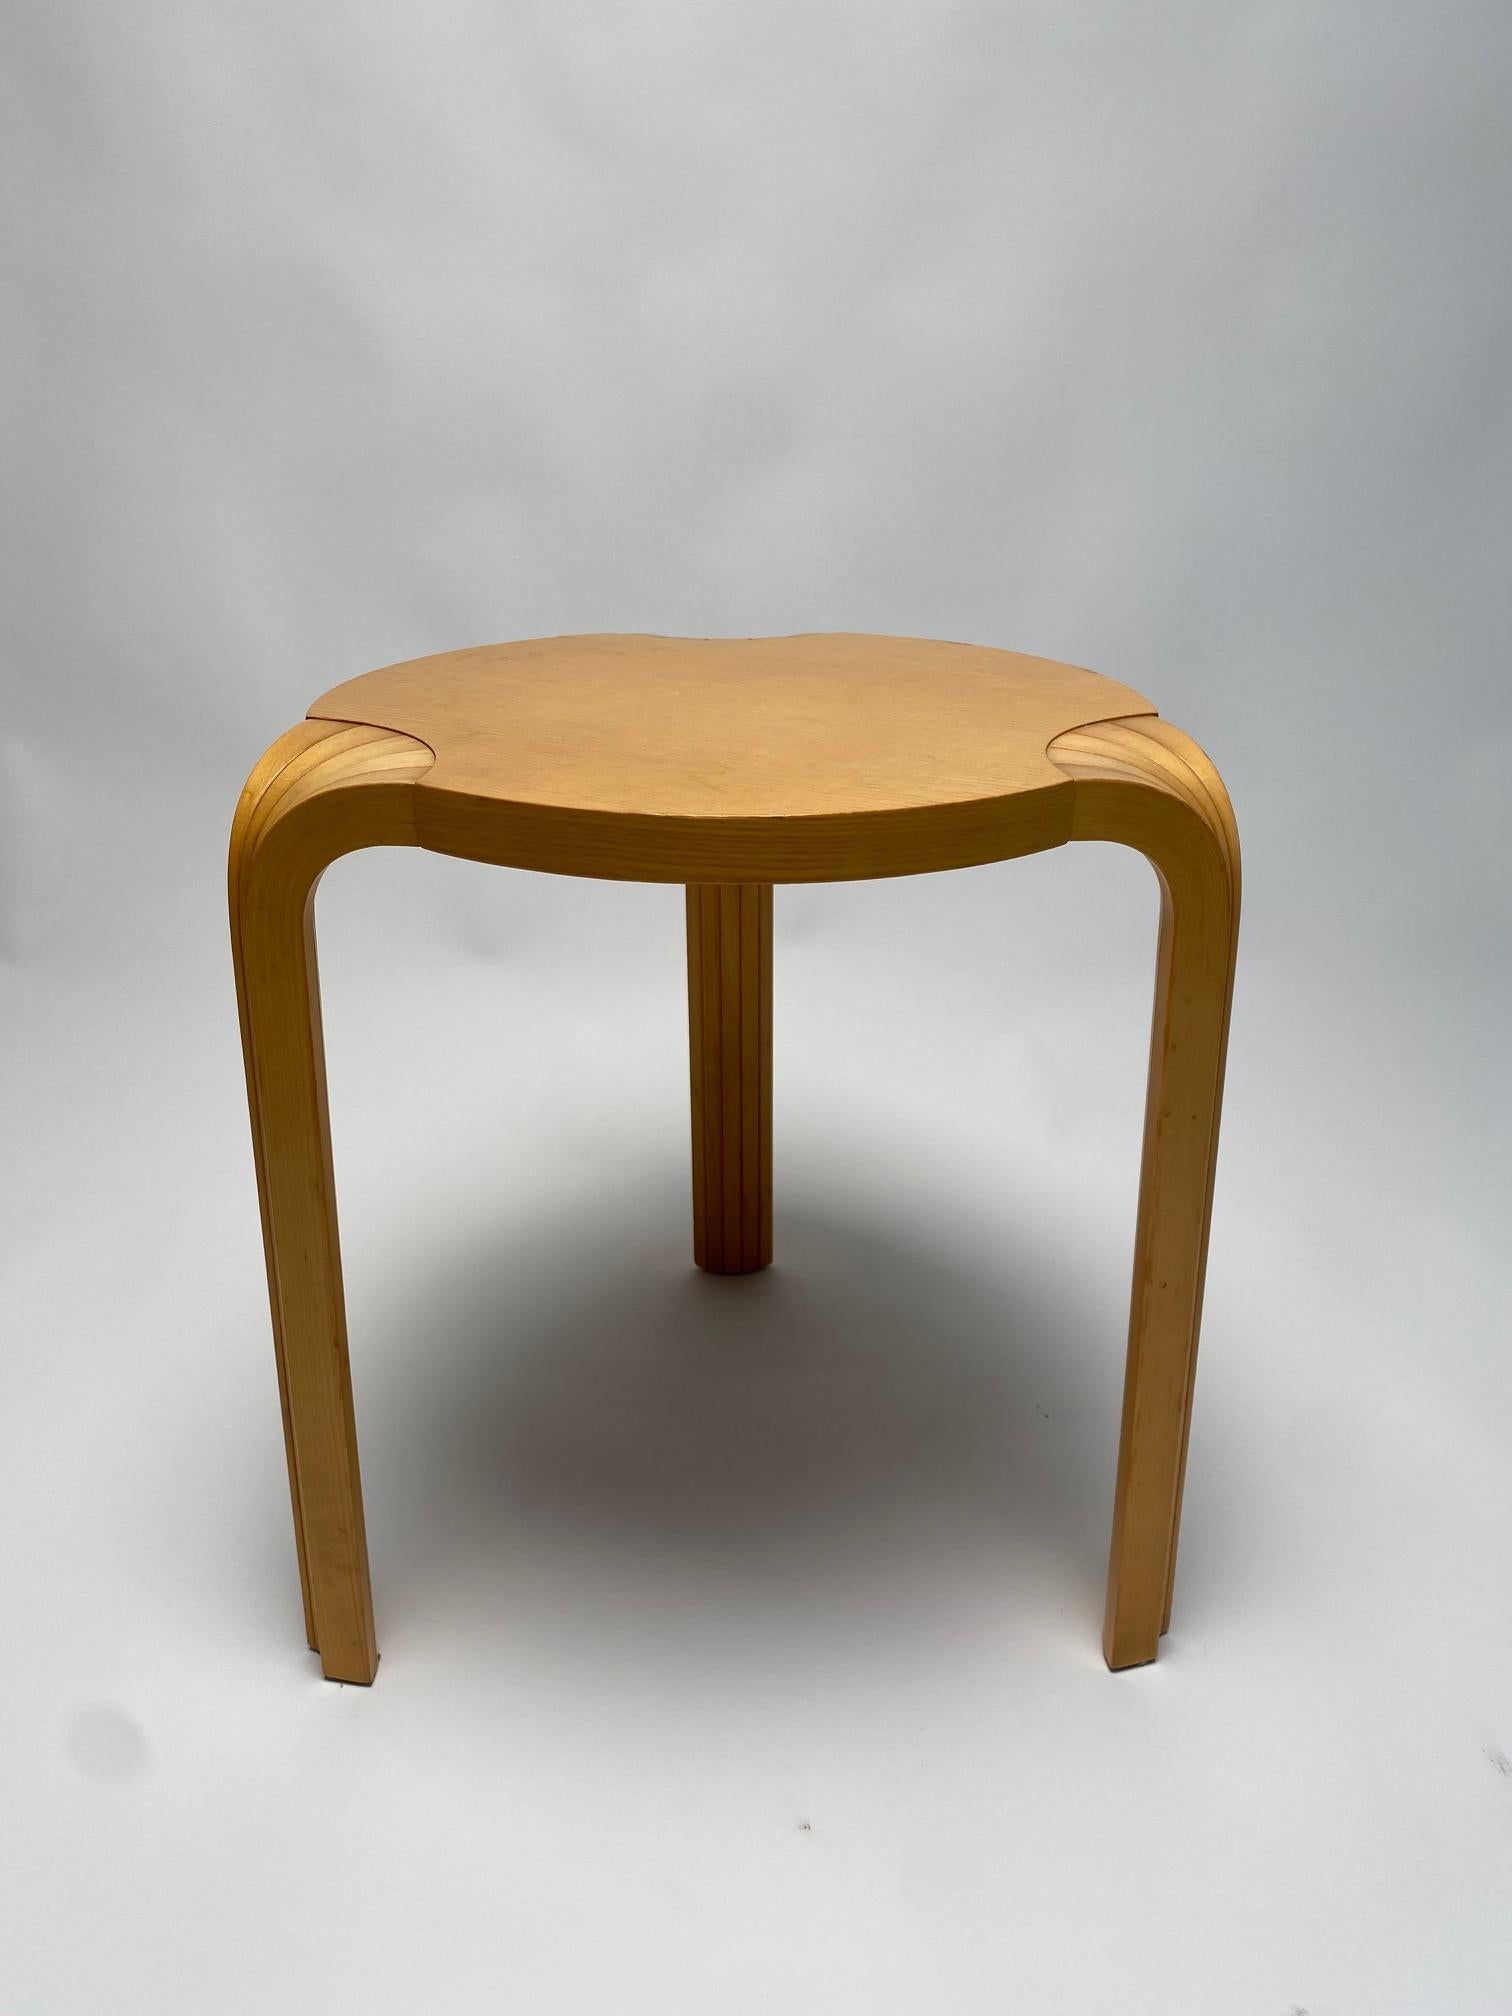 Alvar Aalto, Birch Stool, Model X600, by Artek, circa 1960s. 
A naturally colored Alvar Aalto' s X600 stool. It is one of the most iconic models of the famous Finnish architect and designer, which is characterized by the singular shape of the